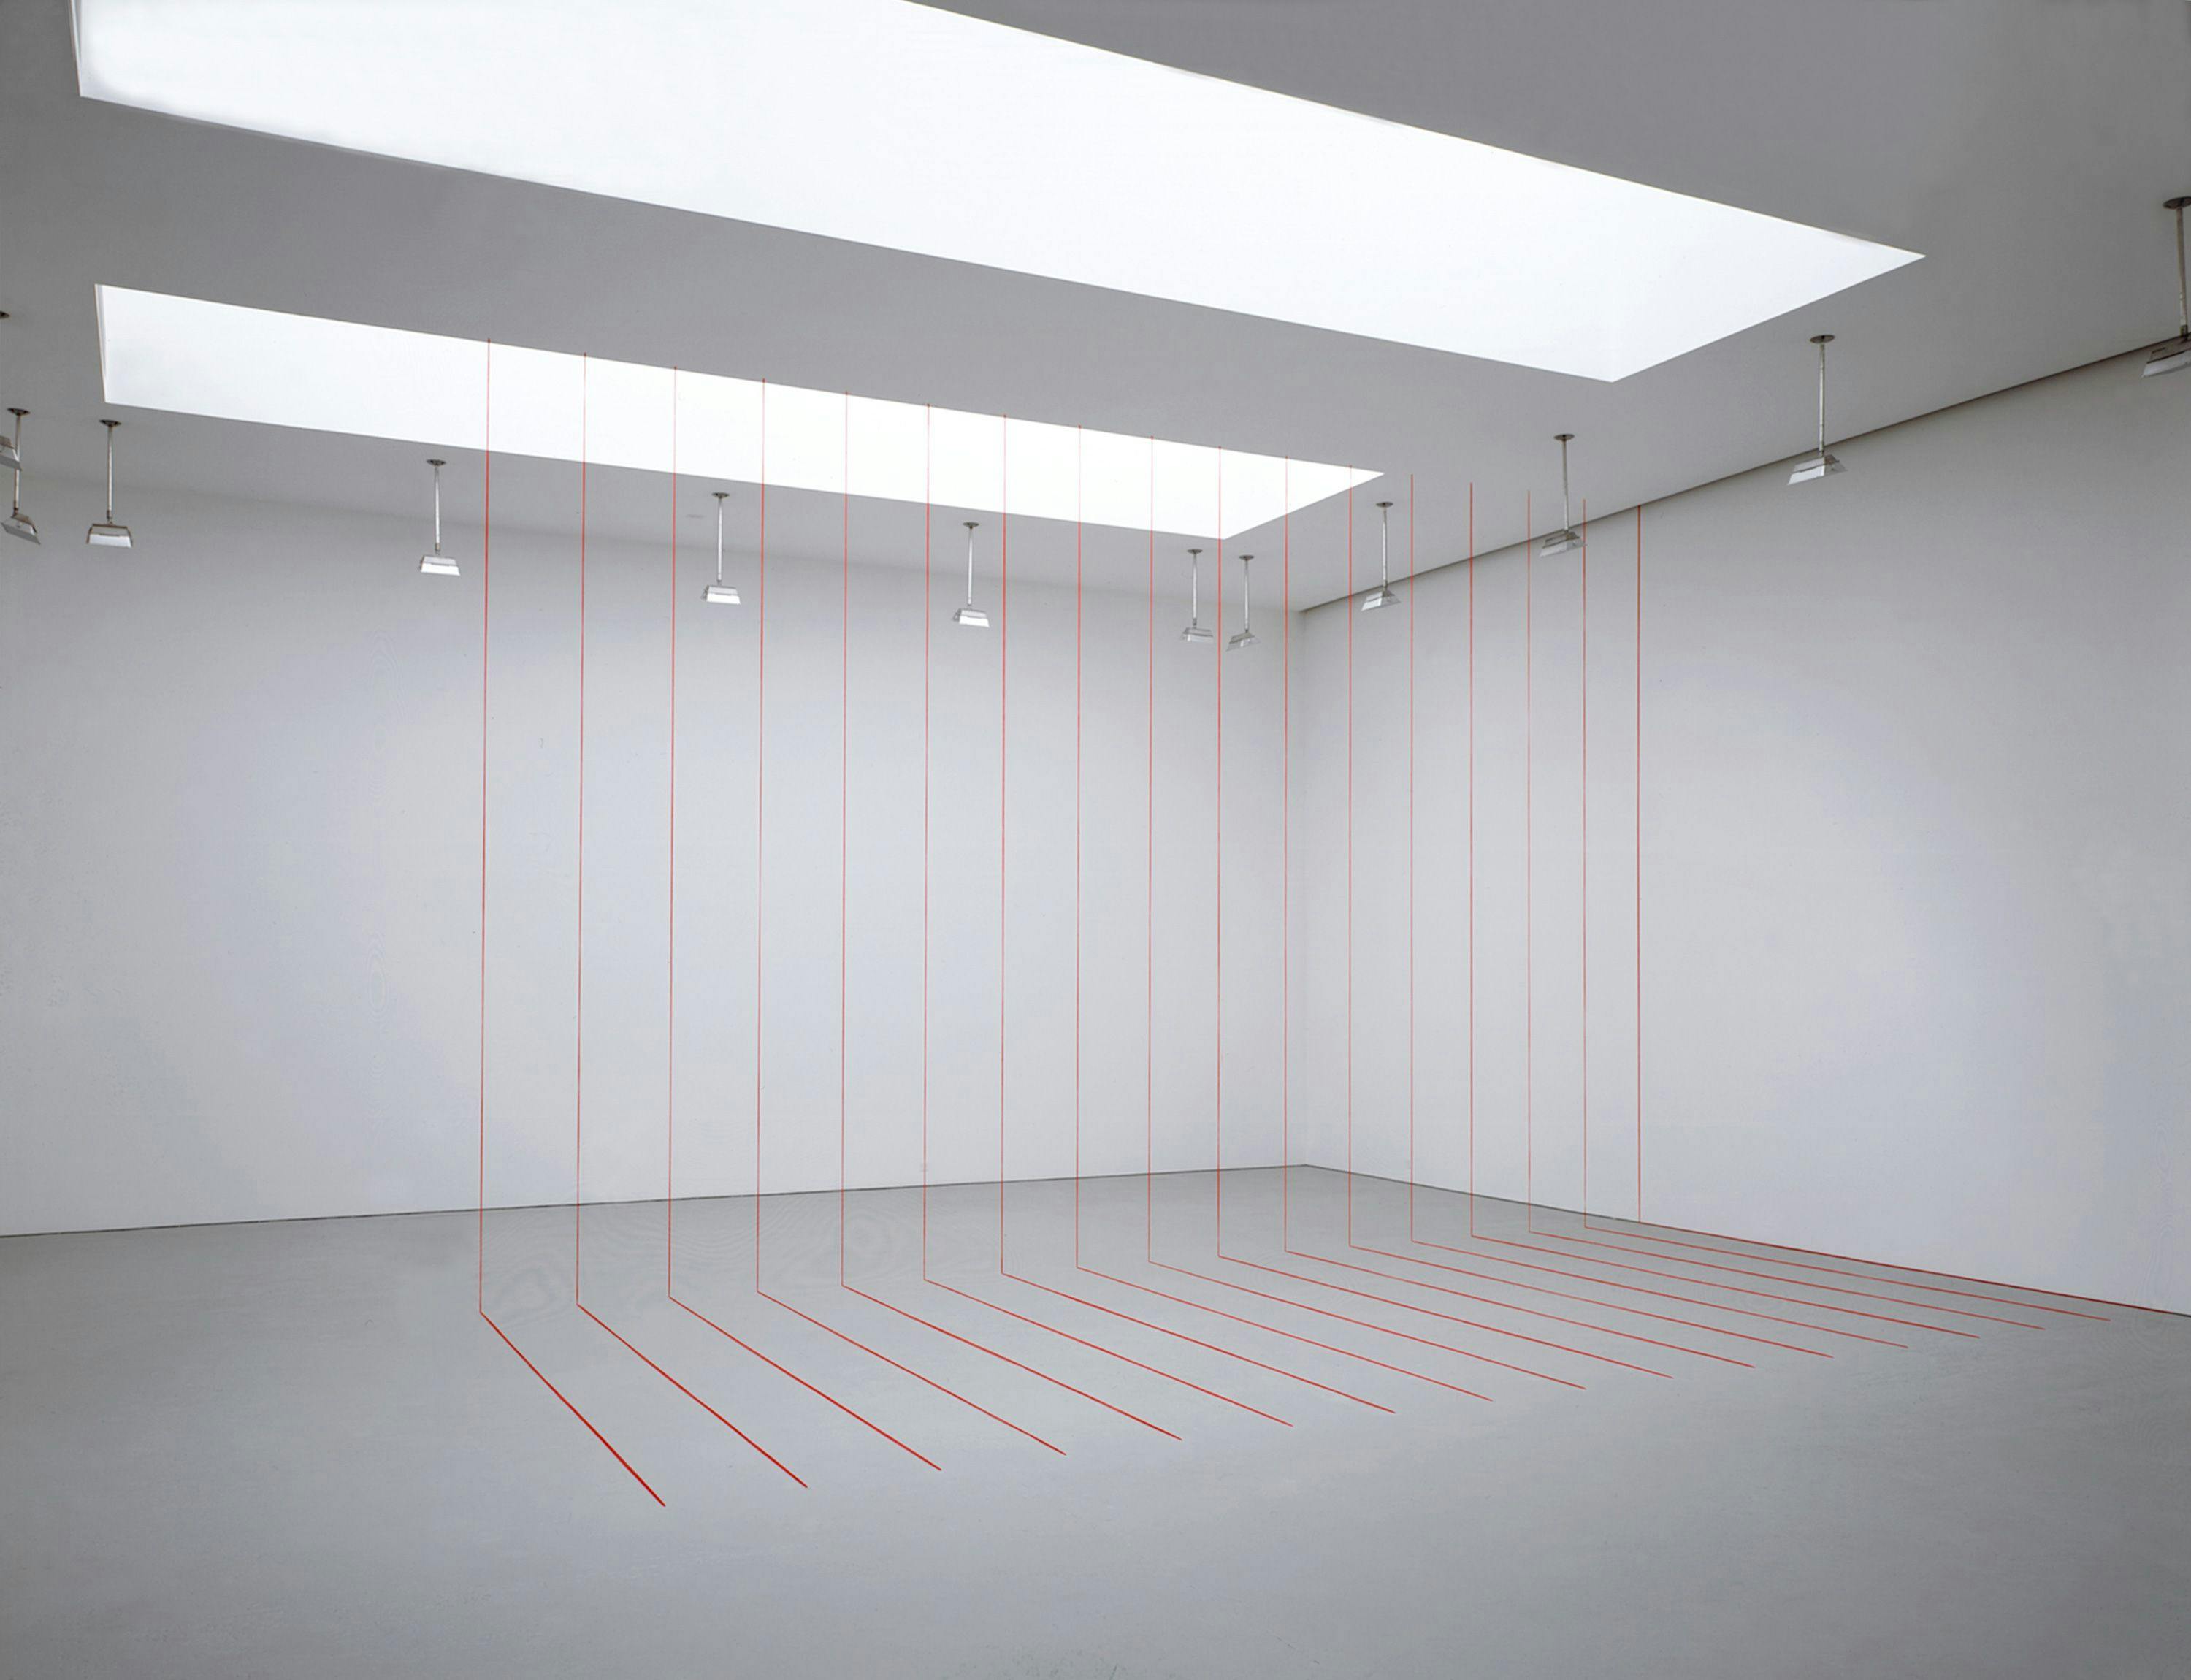 A red acrylic yarn artwork by Fred Sandback, titled Untitled (Sculptural Study, Seventeen-part Right-angled Construction), 1985 and 2005.